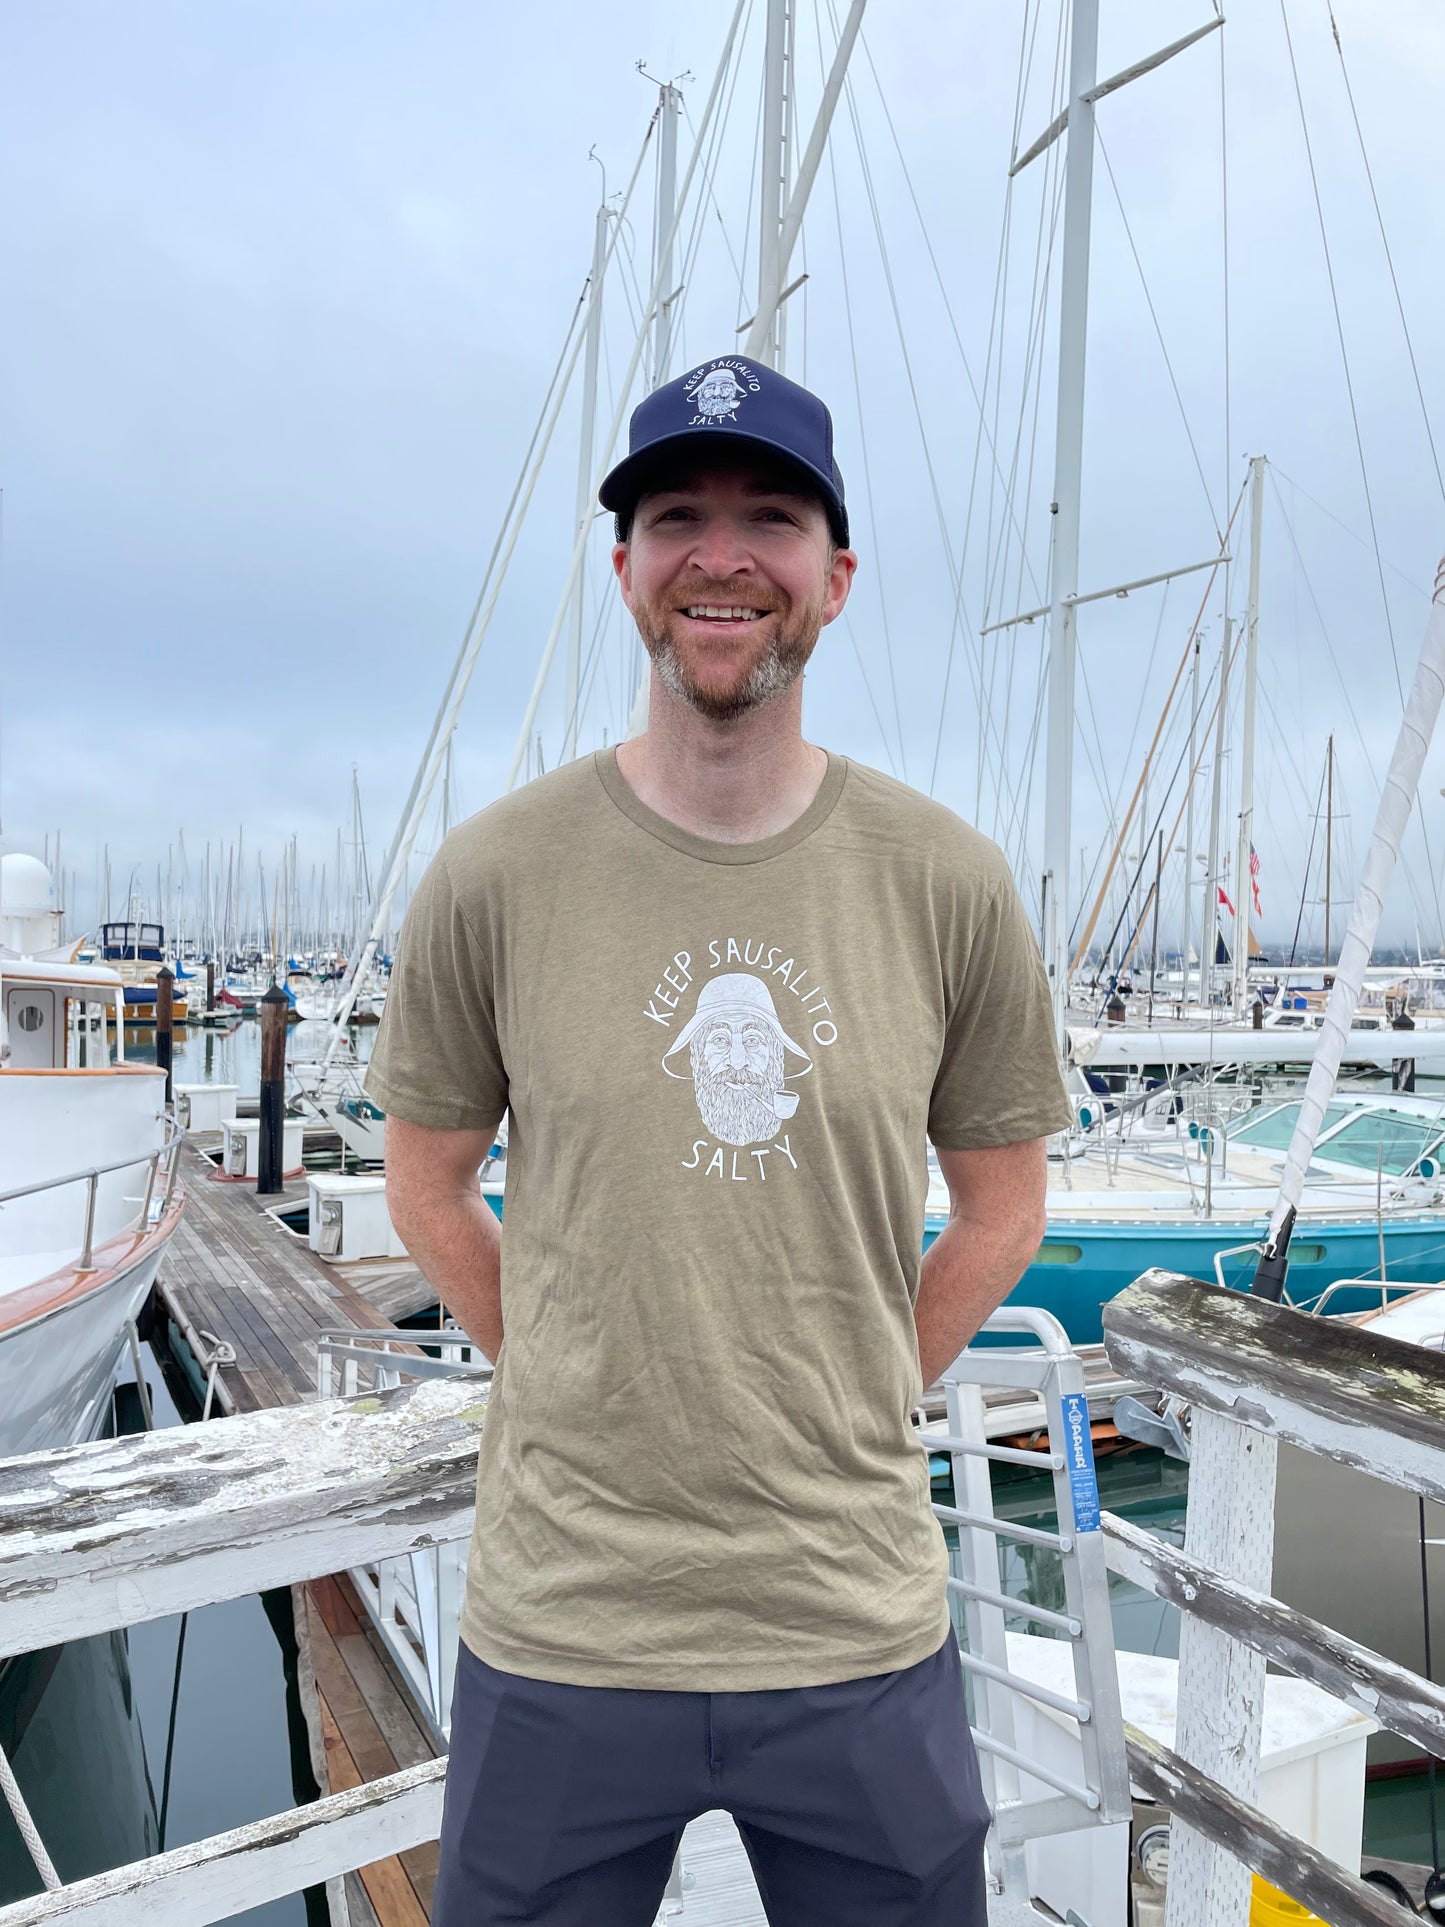 Keep Sausalito Salty: Unisex T-Shirt available in 3 colors